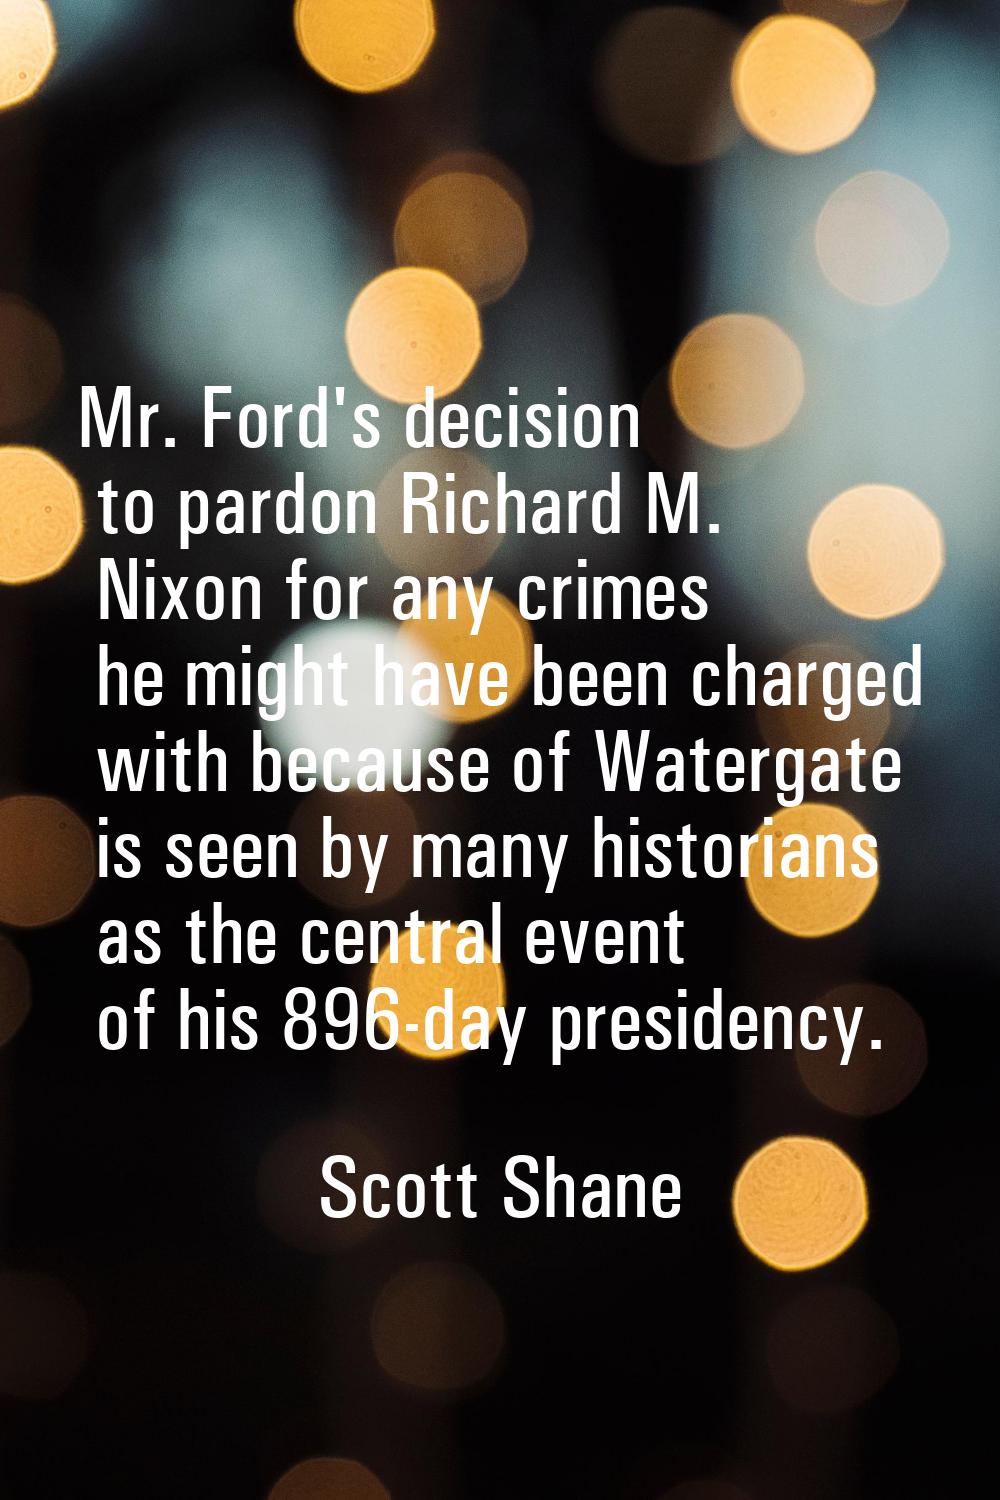 Mr. Ford's decision to pardon Richard M. Nixon for any crimes he might have been charged with becau